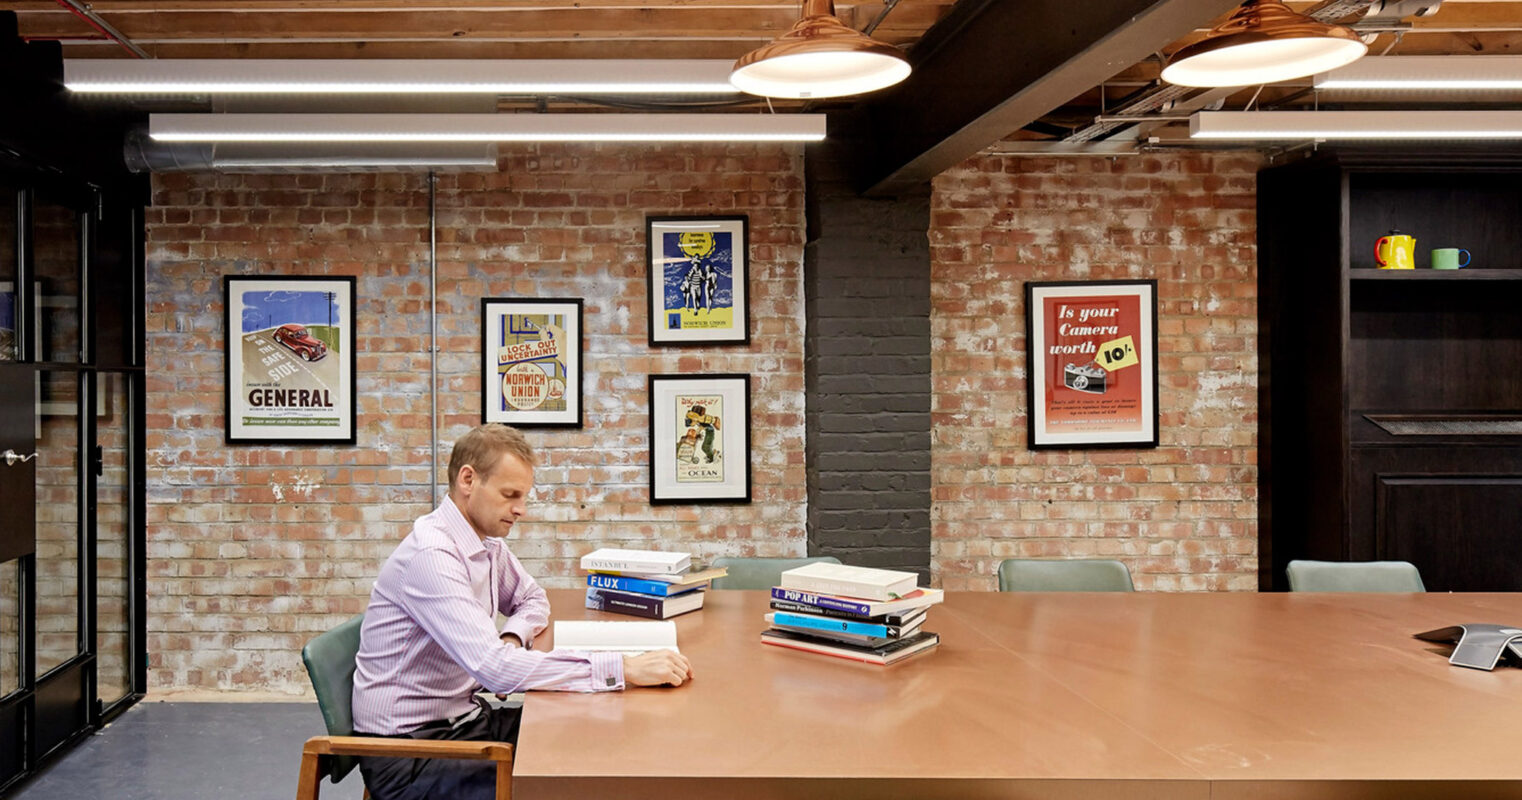 Brick-walled workspace with a long wooden table and eclectic wall art, illuminated by linear lighting, providing a creative and informal meeting environment.